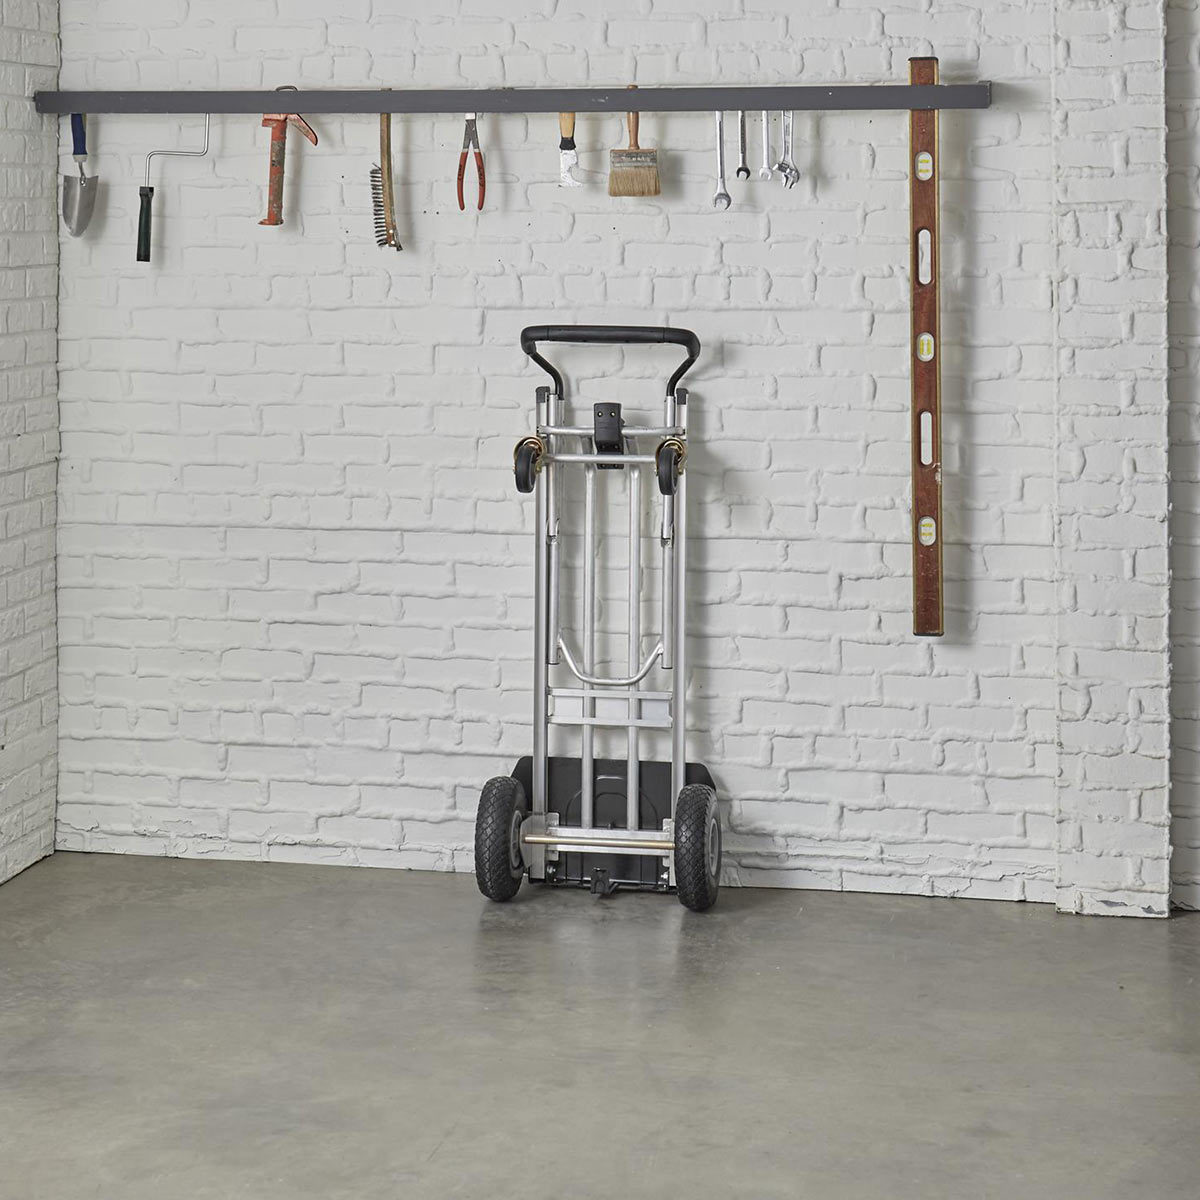 Hand truck standing up on back of wall